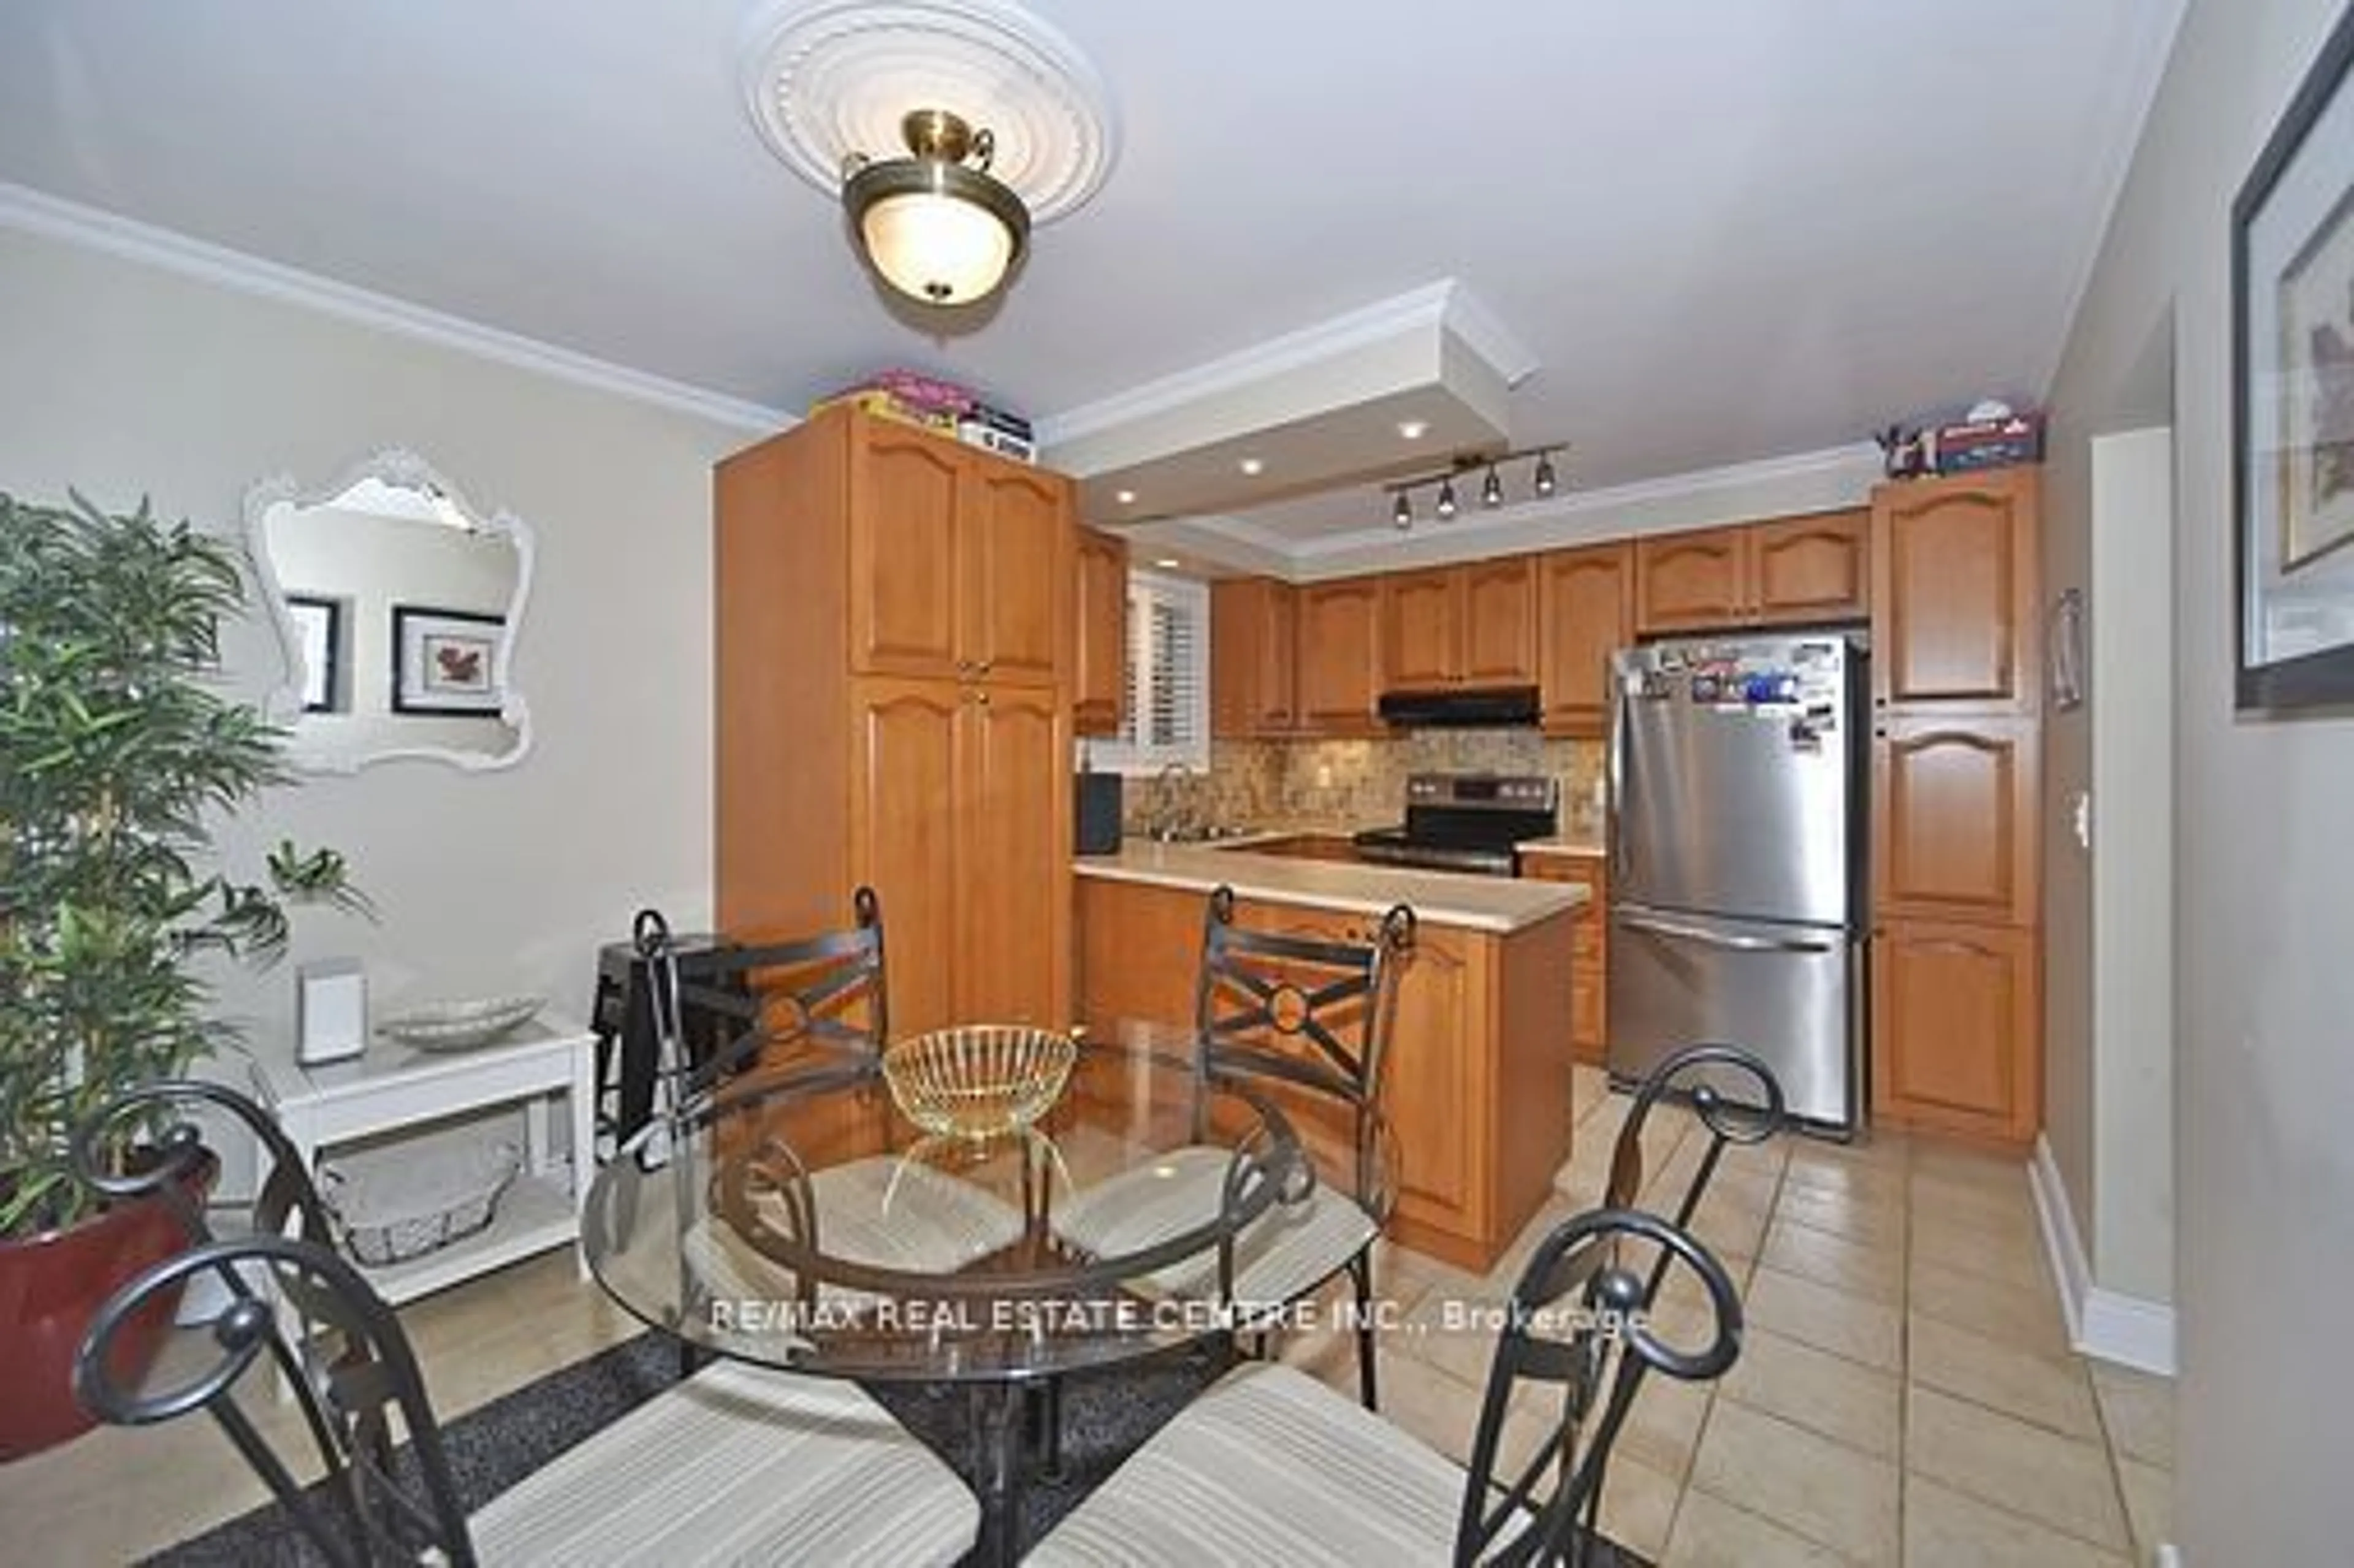 Standard kitchen for 539 Brentwood Ave, Oshawa Ontario L1G 2S9